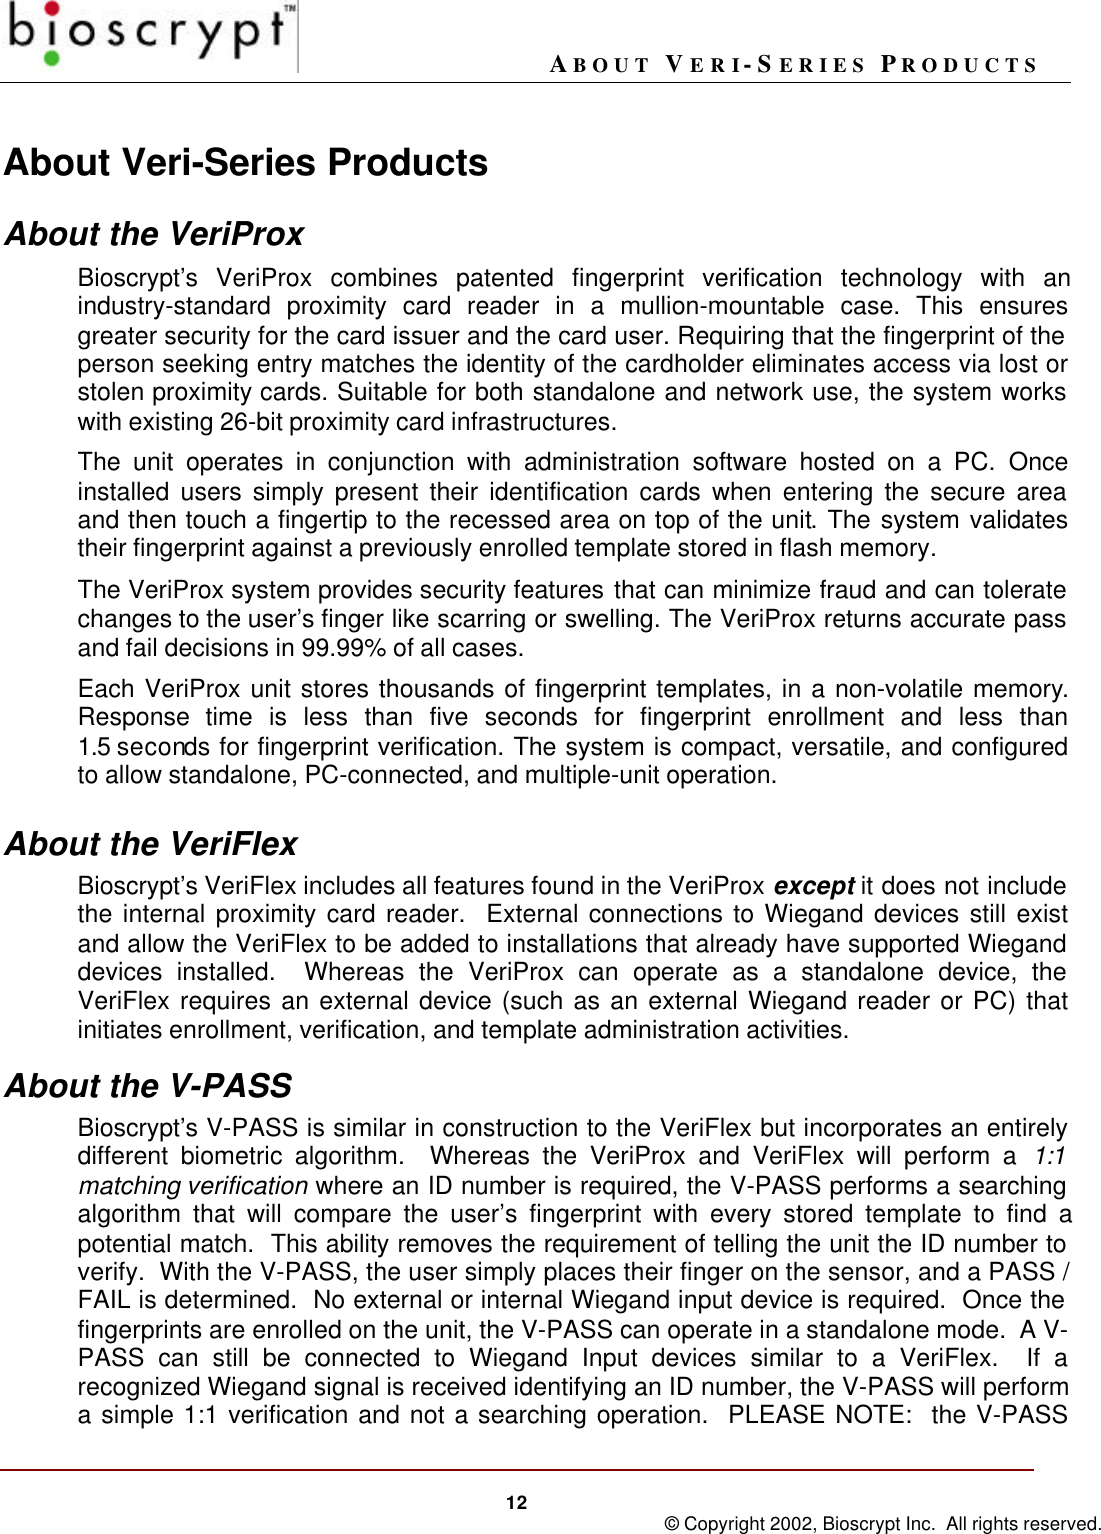 ABOUT VERI-SERIES PRODUCTS12 © Copyright 2002, Bioscrypt Inc.  All rights reserved.About Veri-Series ProductsAbout the VeriProxBioscrypt’s VeriProx combines patented fingerprint verification technology with anindustry-standard proximity card reader in a mullion-mountable case. This ensuresgreater security for the card issuer and the card user. Requiring that the fingerprint of theperson seeking entry matches the identity of the cardholder eliminates access via lost orstolen proximity cards. Suitable for both standalone and network use, the system workswith existing 26-bit proximity card infrastructures.The unit operates in conjunction with administration software hosted on a PC.  Onceinstalled users simply present their identification cards when entering the secure areaand then touch a fingertip to the recessed area on top of the unit. The system validatestheir fingerprint against a previously enrolled template stored in flash memory.The VeriProx system provides security features that can minimize fraud and can toleratechanges to the user’s finger like scarring or swelling. The VeriProx returns accurate passand fail decisions in 99.99% of all cases.Each VeriProx unit stores thousands of fingerprint templates, in a non-volatile memory.Response time is less than five seconds for fingerprint enrollment and less than1.5 seconds for fingerprint verification. The system is compact, versatile, and configuredto allow standalone, PC-connected, and multiple-unit operation.About the VeriFlexBioscrypt’s VeriFlex includes all features found in the VeriProx except it does not includethe internal proximity card reader.  External connections to Wiegand devices still existand allow the VeriFlex to be added to installations that already have supported Wieganddevices installed.  Whereas the VeriProx can operate as a standalone device, theVeriFlex requires an external device (such as an external Wiegand reader or PC) thatinitiates enrollment, verification, and template administration activities.About the V-PASSBioscrypt’s V-PASS is similar in construction to the VeriFlex but incorporates an entirelydifferent biometric algorithm.  Whereas the VeriProx and VeriFlex will perform a 1:1matching verification where an ID number is required, the V-PASS performs a searchingalgorithm that will compare the user’s fingerprint with every stored template to find apotential match.  This ability removes the requirement of telling the unit the ID number toverify.  With the V-PASS, the user simply places their finger on the sensor, and a PASS /FAIL is determined.  No external or internal Wiegand input device is required.  Once thefingerprints are enrolled on the unit, the V-PASS can operate in a standalone mode.  A V-PASS can still be connected to Wiegand Input devices similar to a VeriFlex.  If arecognized Wiegand signal is received identifying an ID number, the V-PASS will performa simple 1:1 verification and not a searching operation.  PLEASE NOTE:  the V-PASS